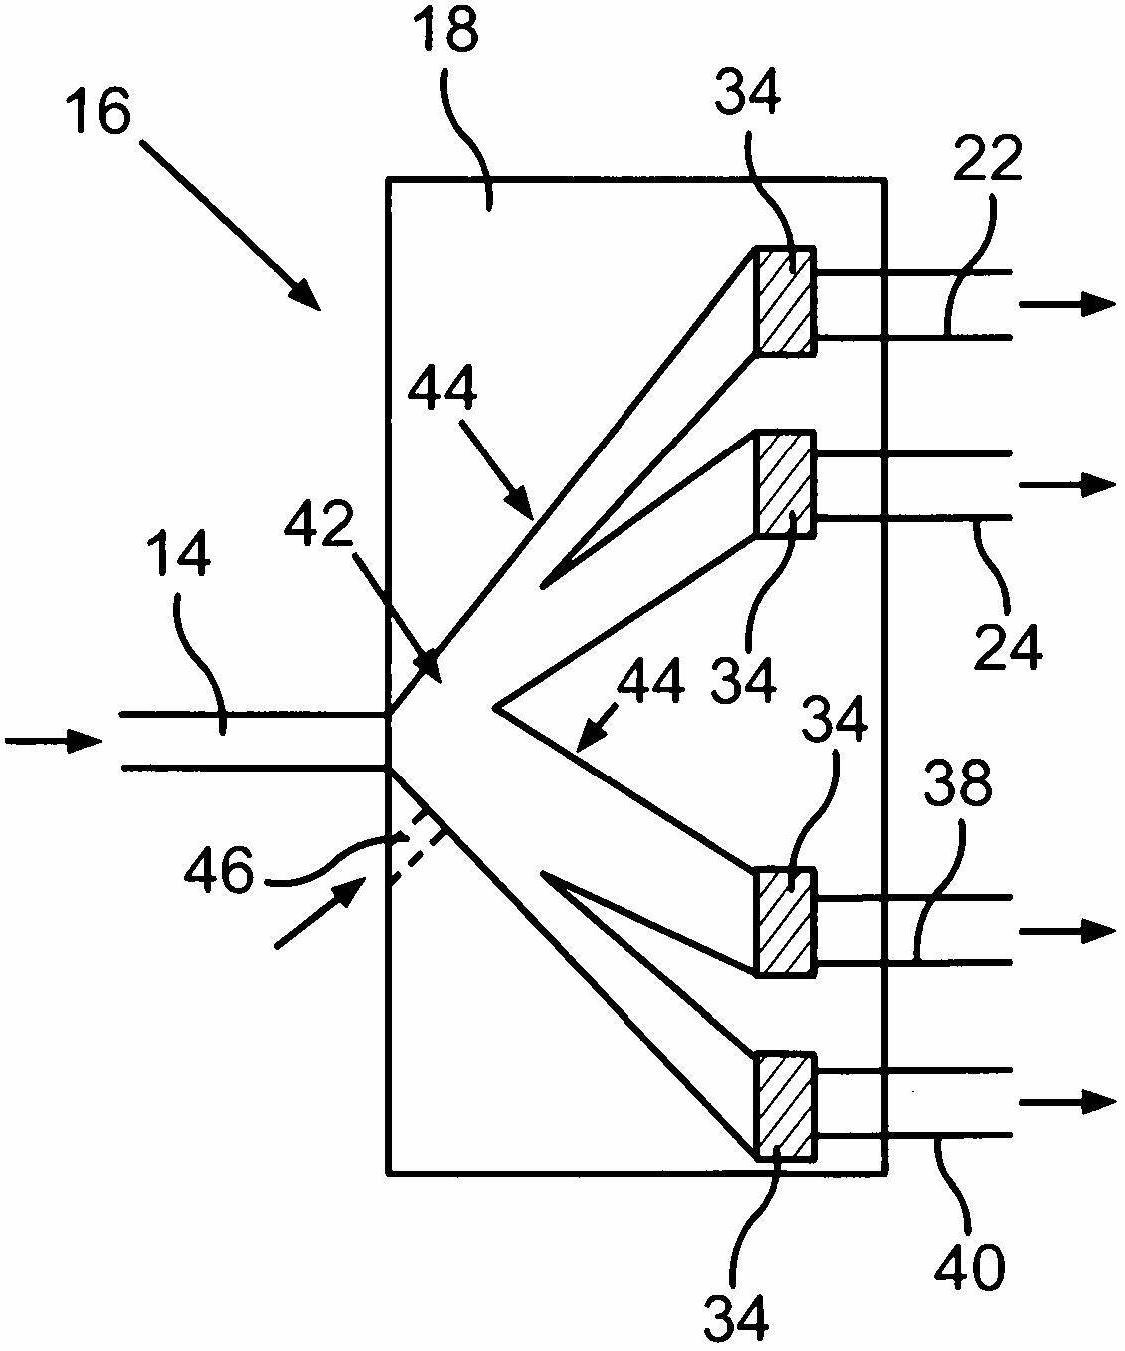 Arrangement of a wiper system having an associated windshield wiper system on a motor vehicle